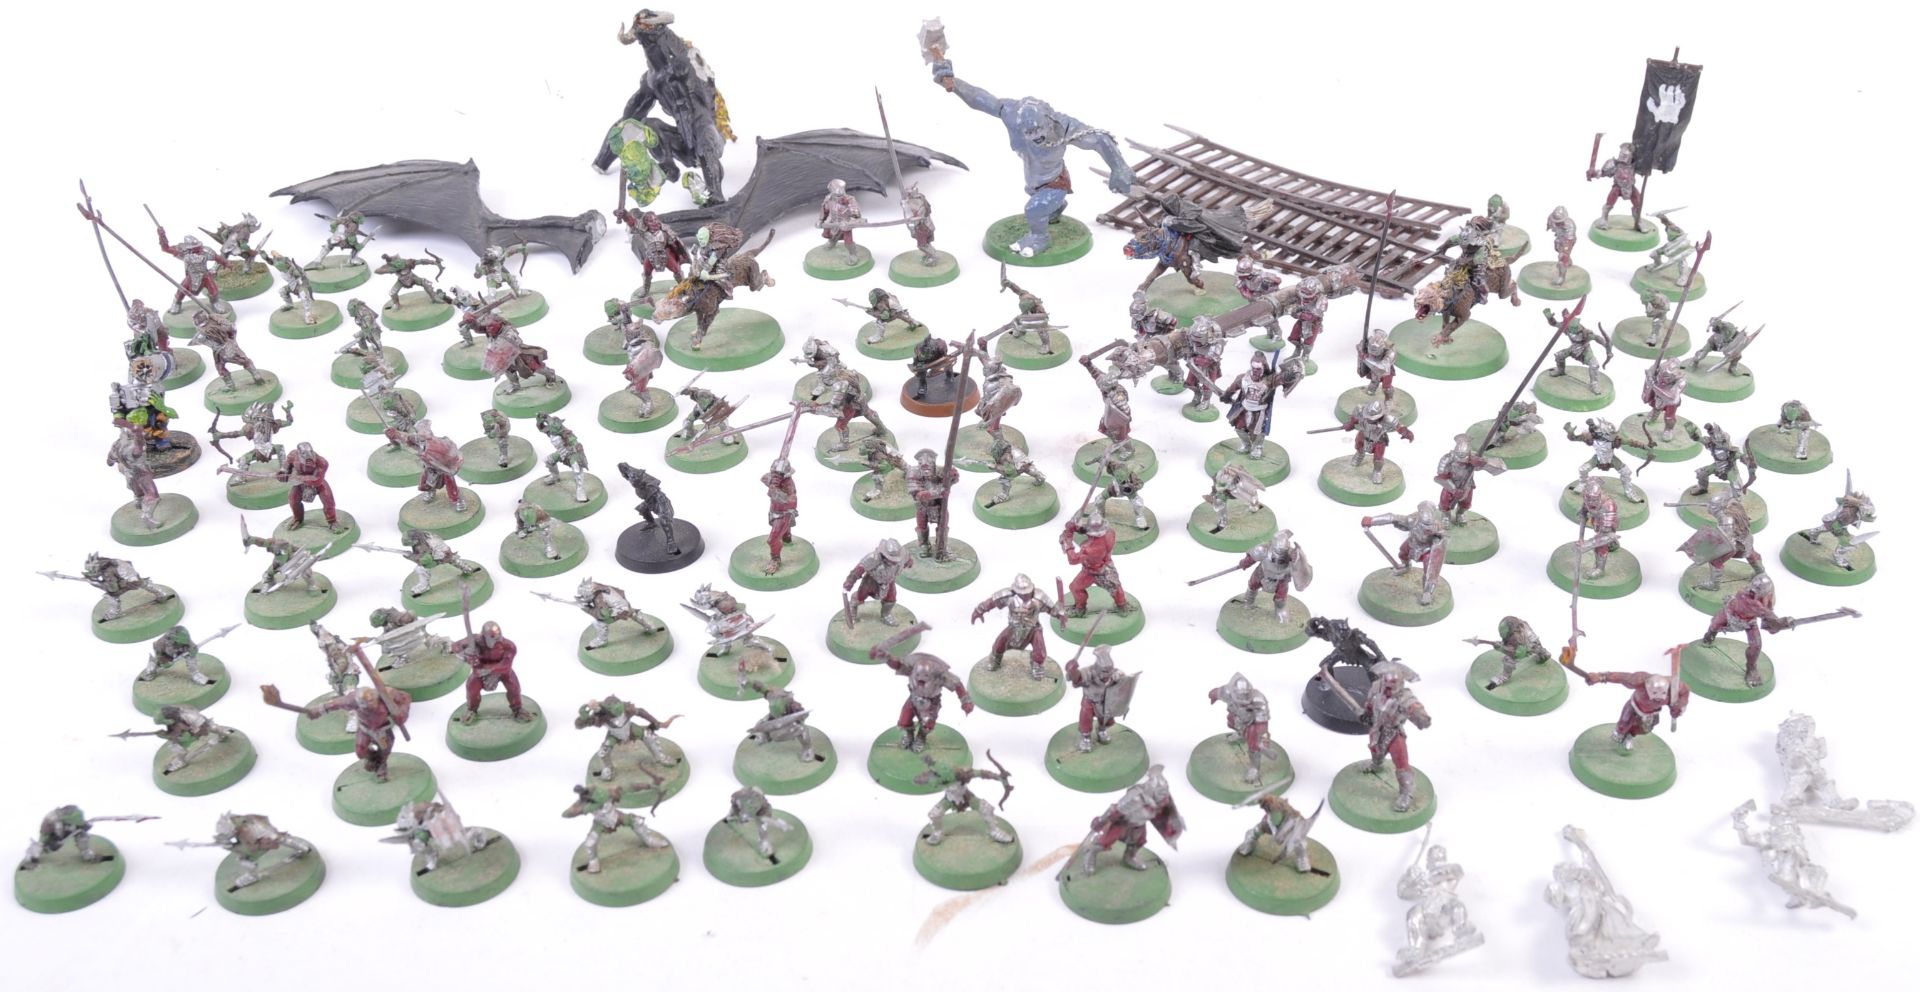 WARHAMMER COLLECTION OF LOTR WARGAMING FIGURES